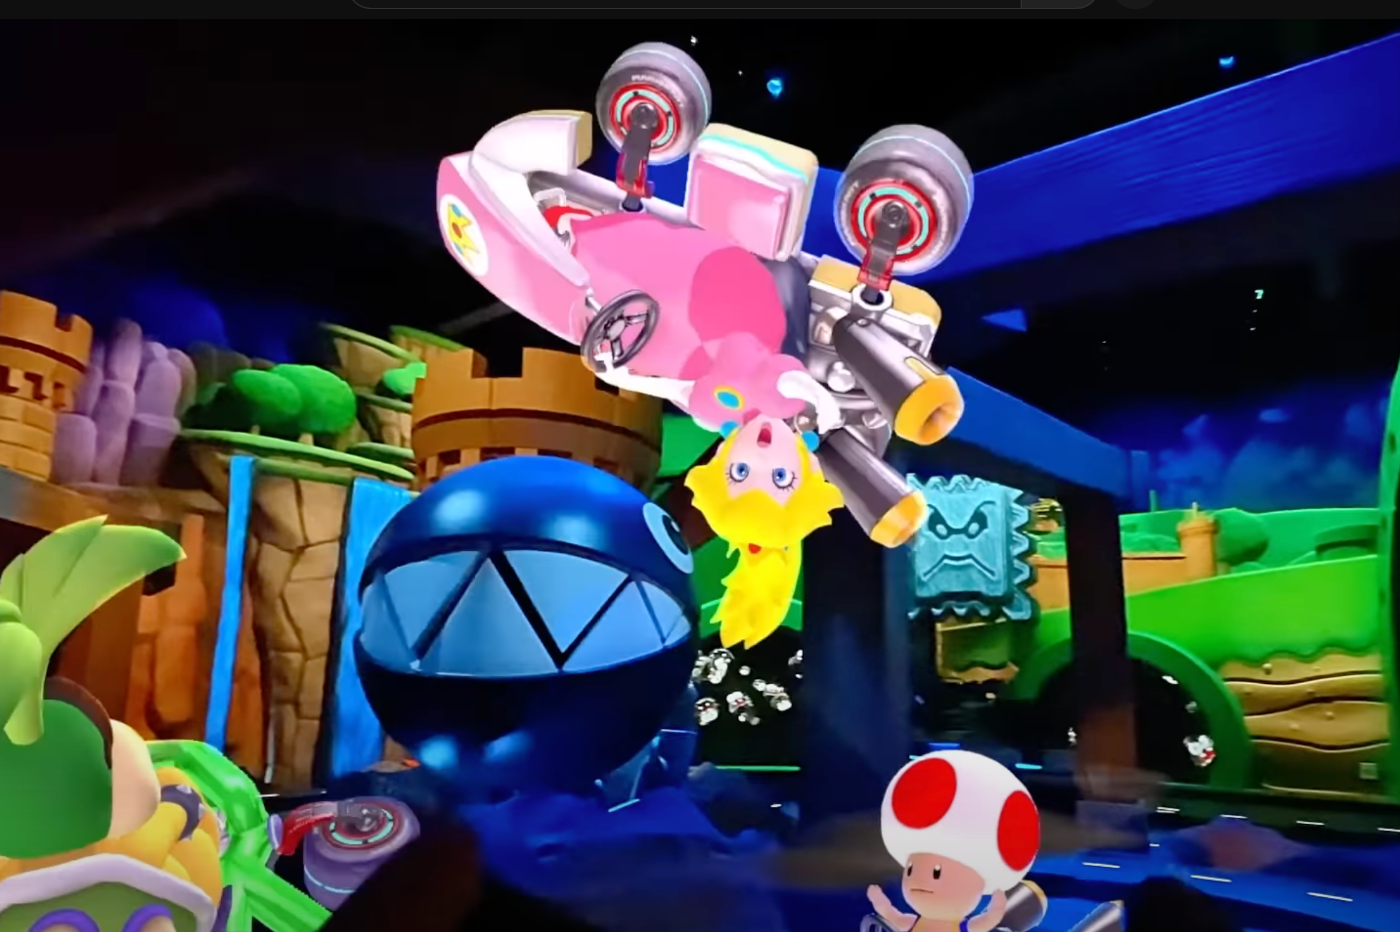 Apple buys the manufacturer of the AR headset of the Mario Kart attraction